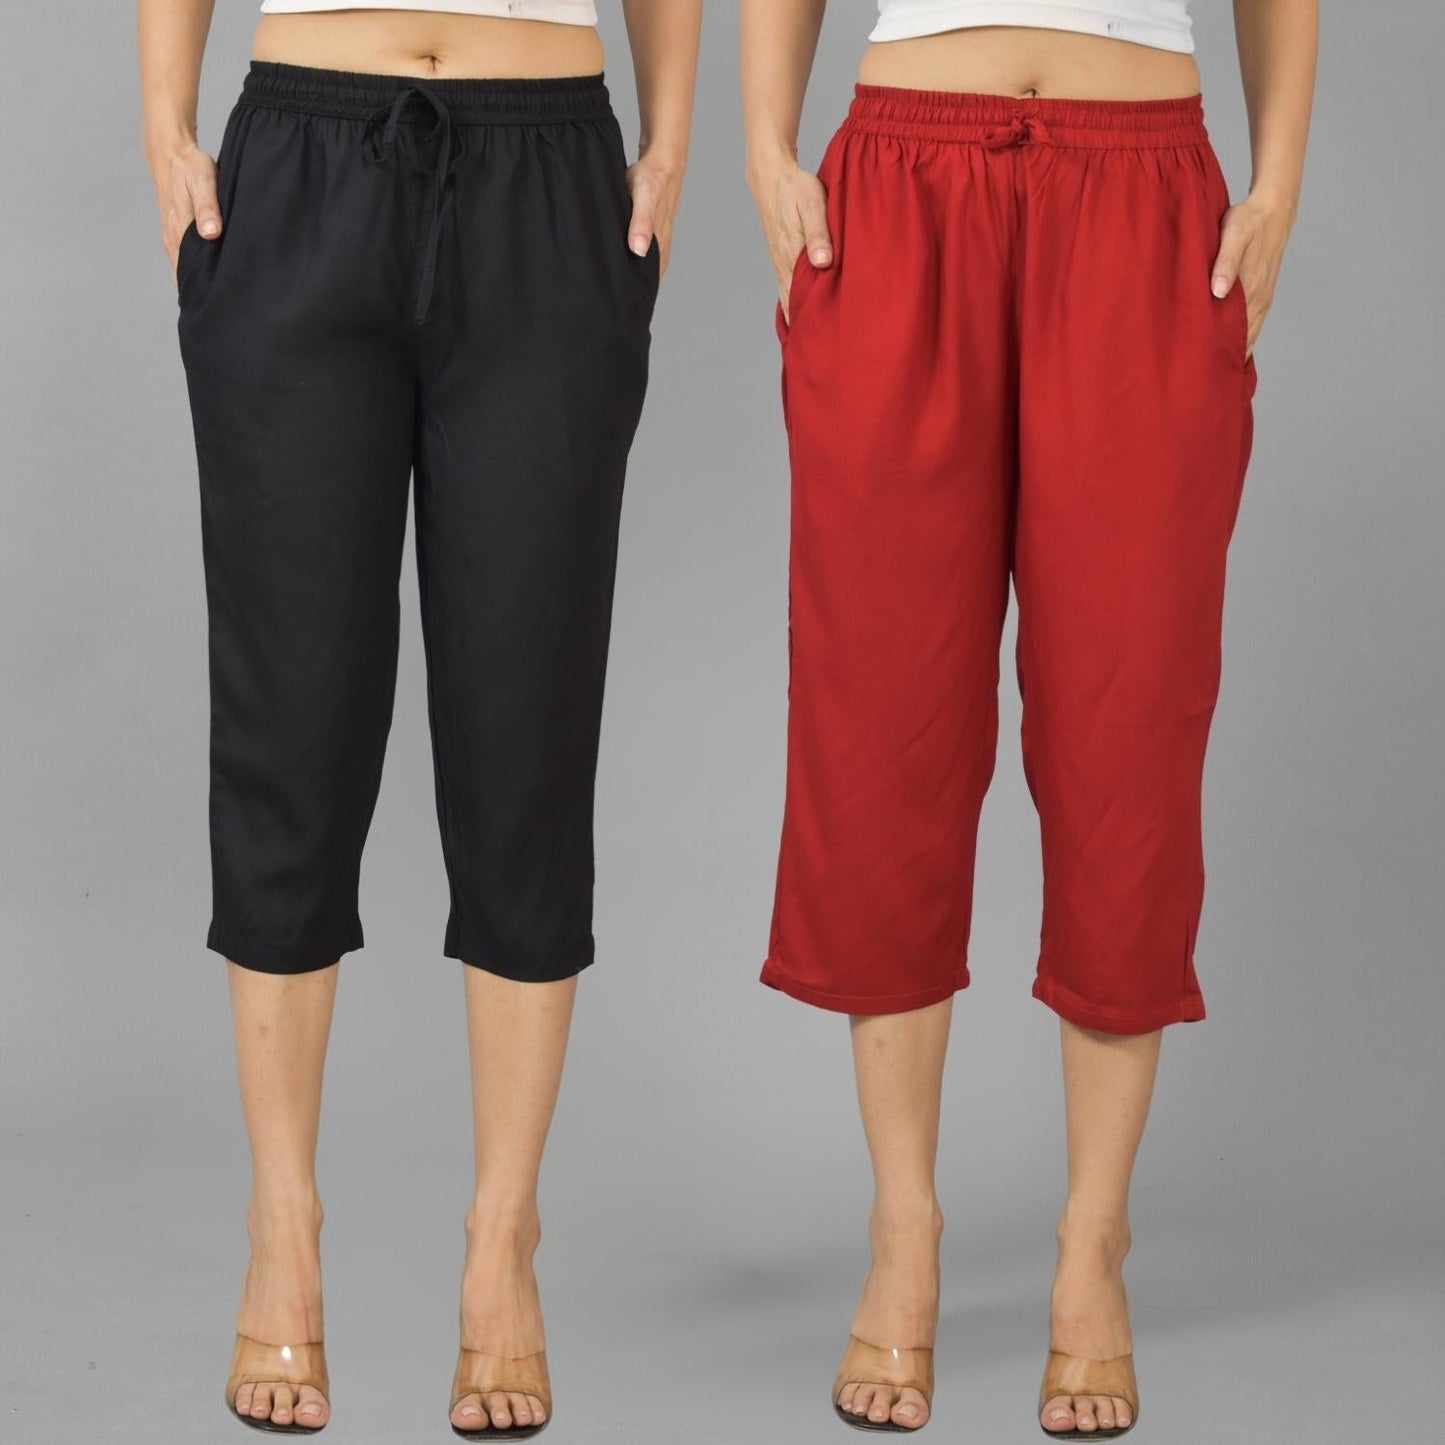 Pack Of 2 Womens Black And Maroon Calf Length Rayon Culottes Trouser Combo